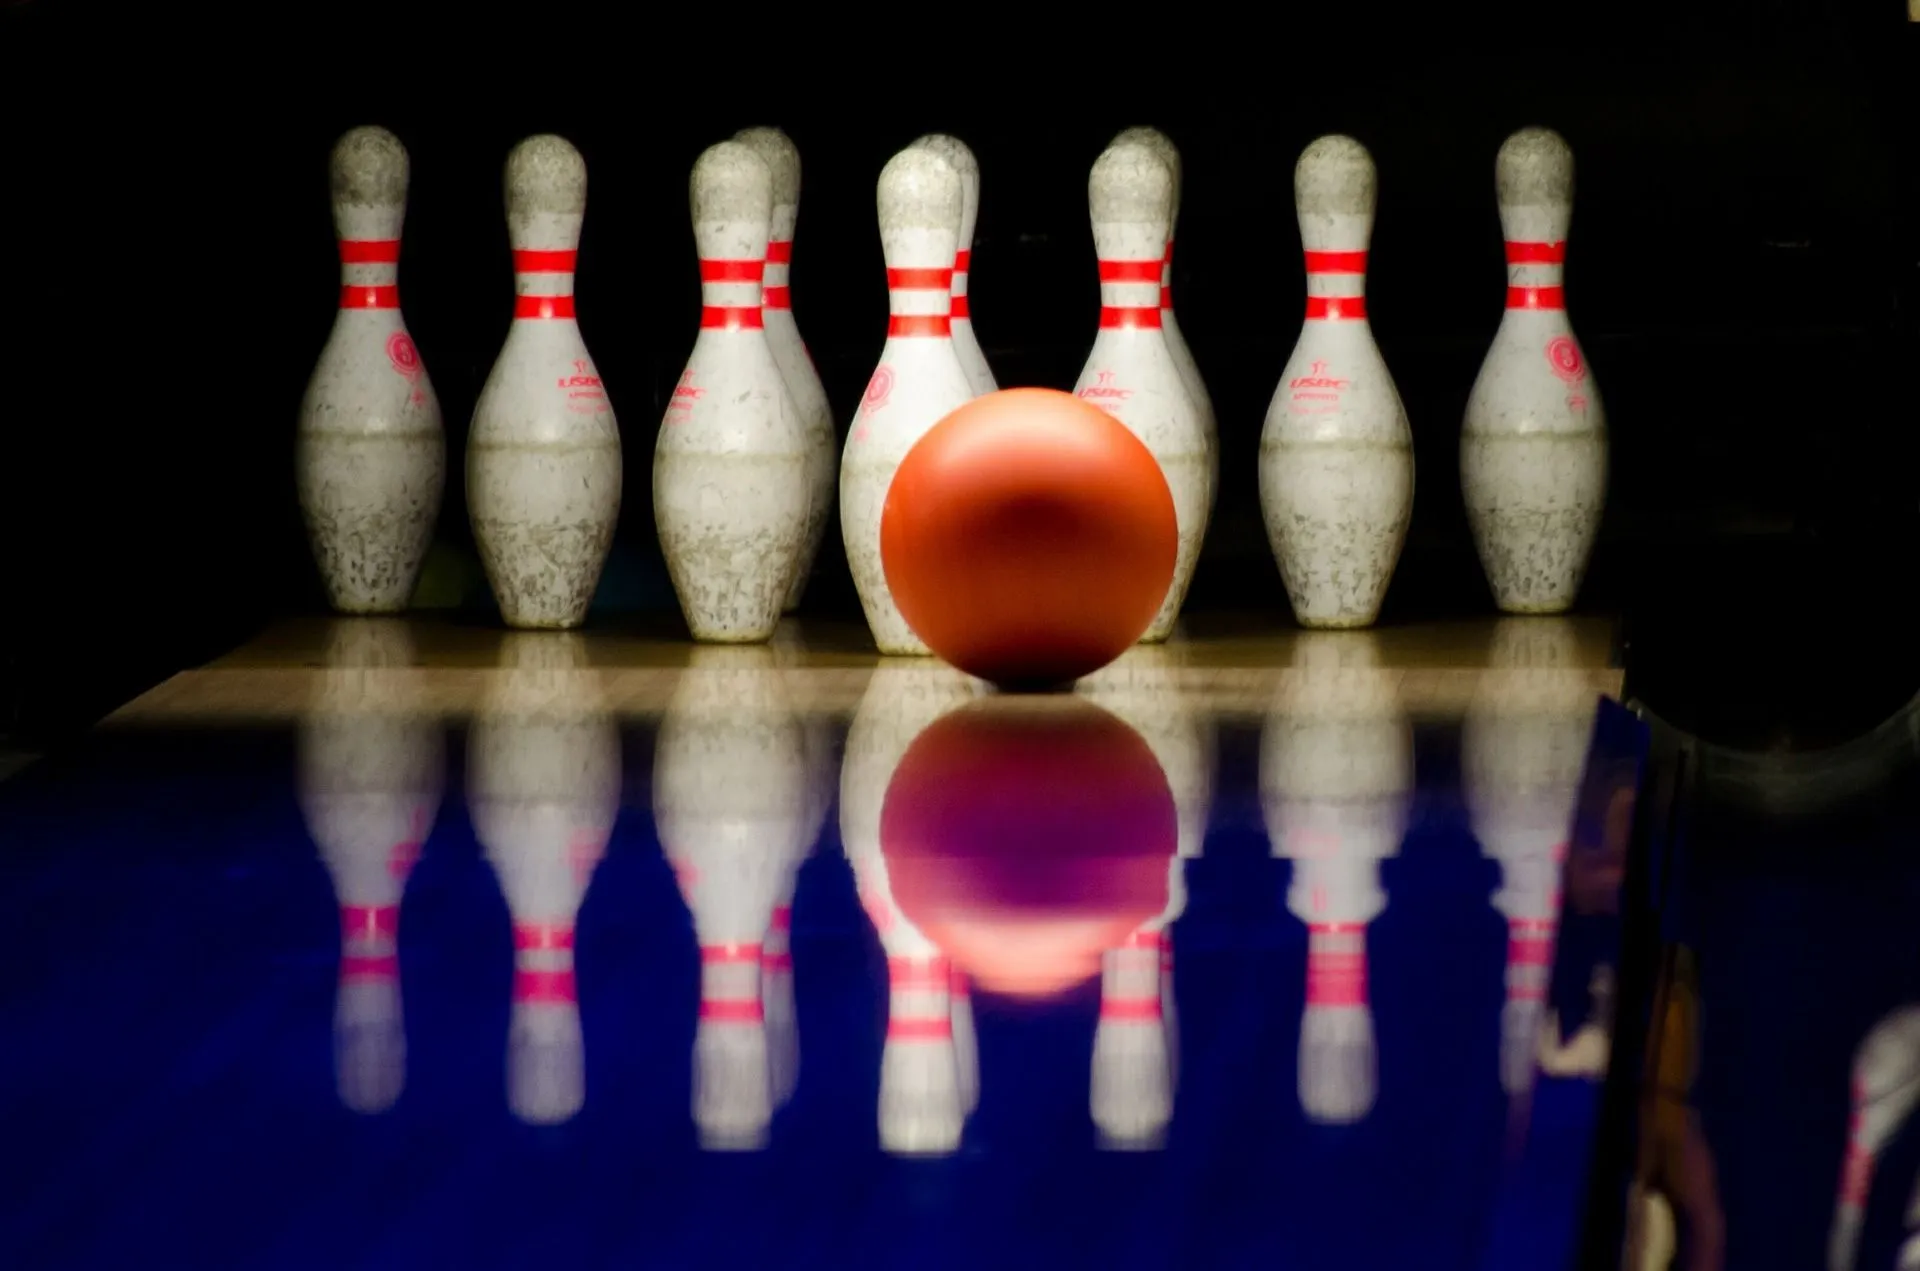 Bowling balls were made of wood in the early days, but are now made out of rubber and polyester resin.